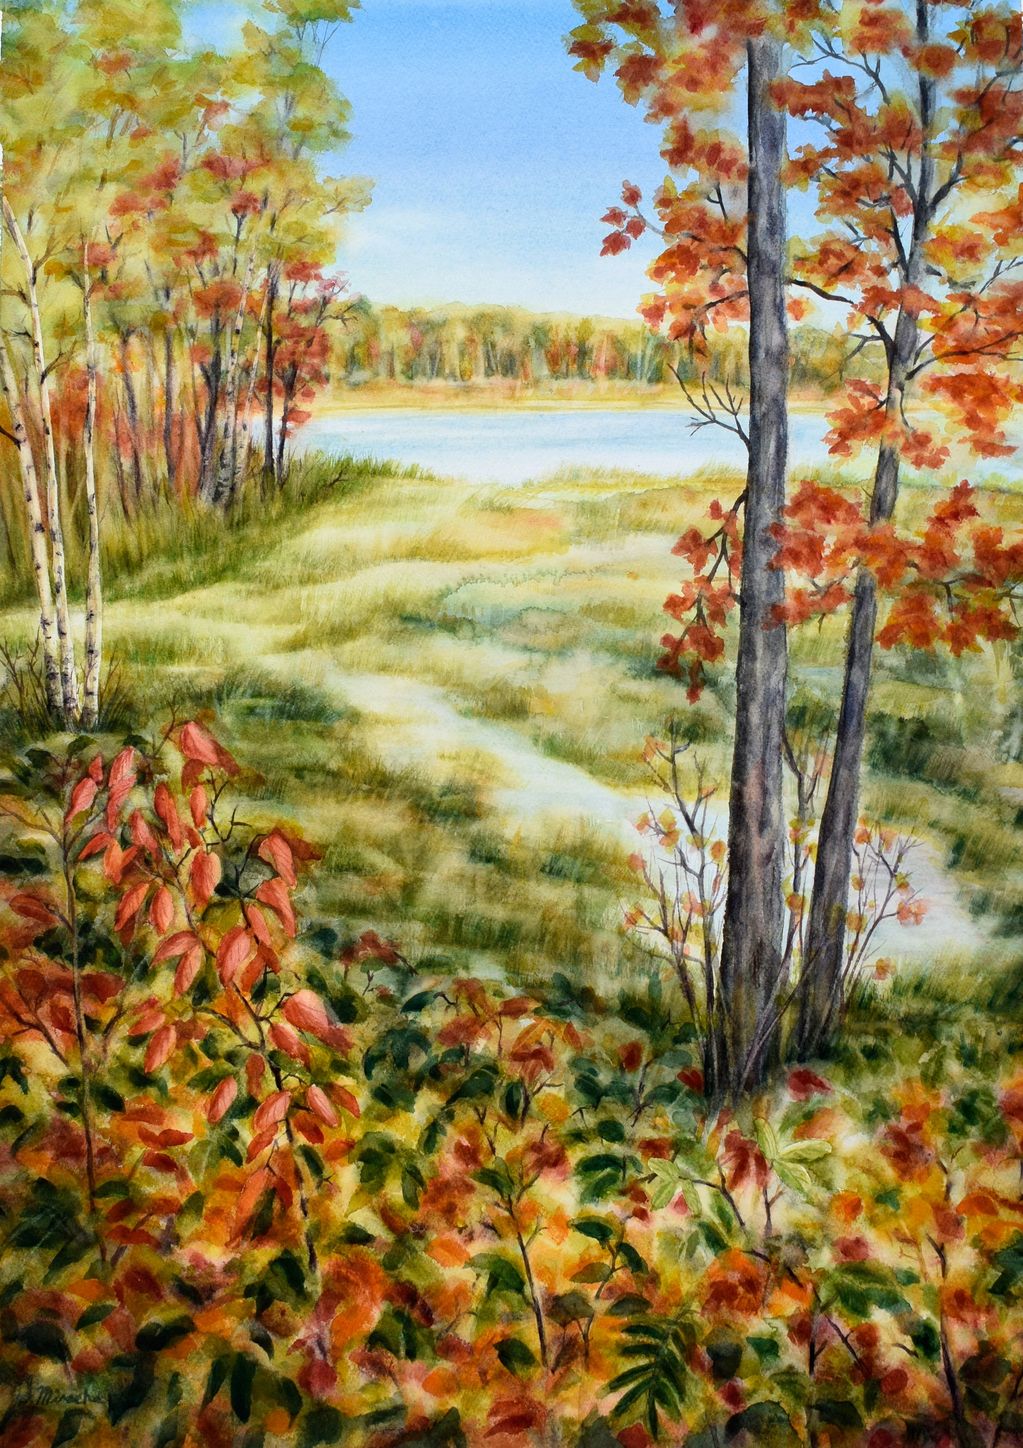 Original watercolor painting, Beaver Bond, inspired by Minnesota north woods, autumn colors.